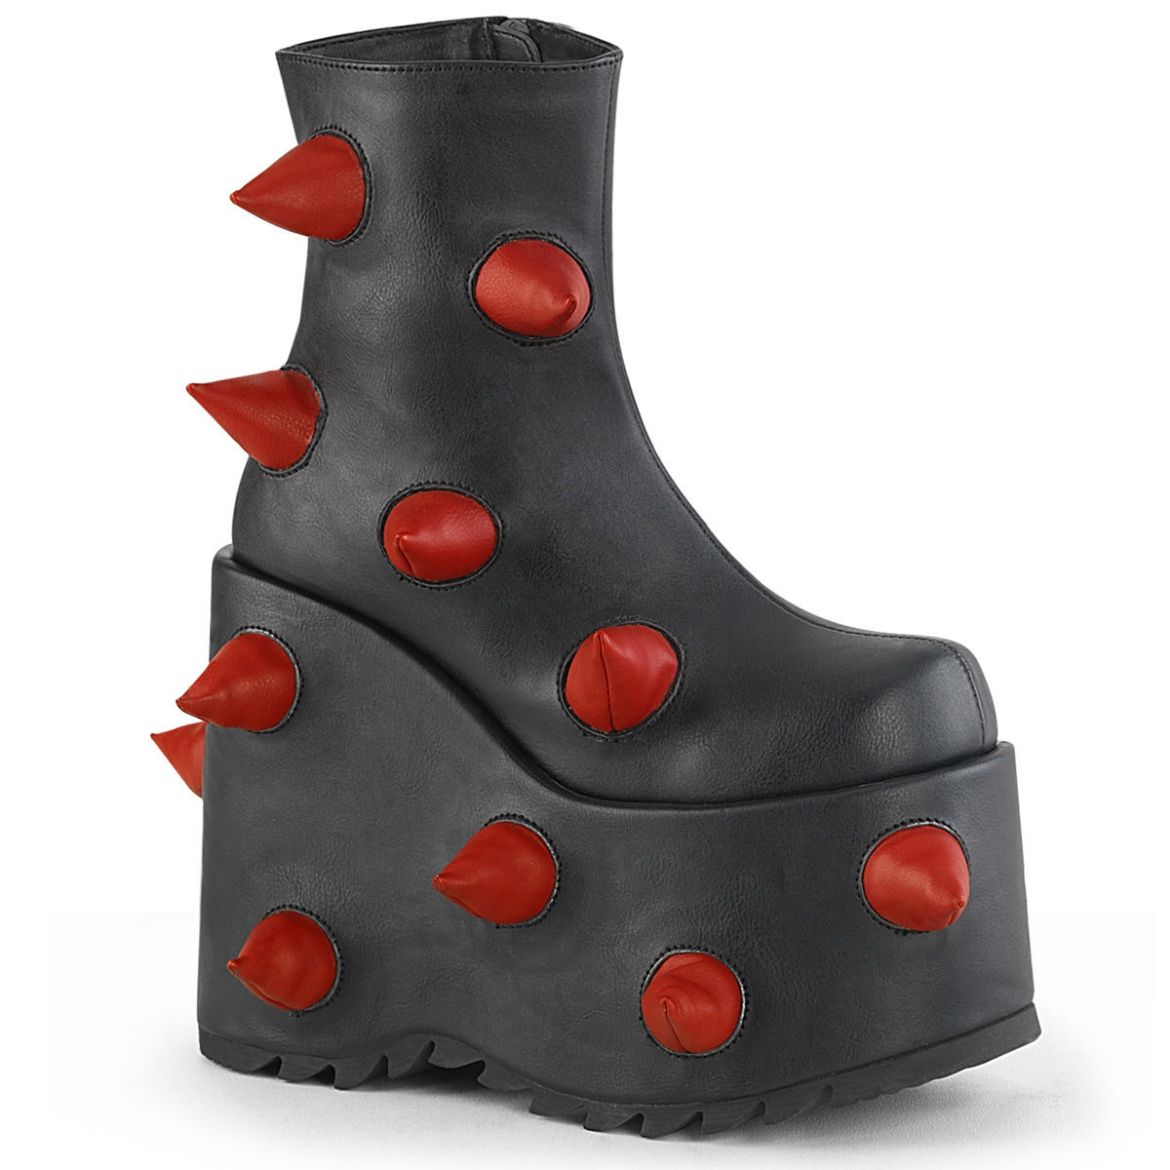 Image of Demonia SLAY-77 Blk-Red Vegan Leather 7 Inch PF Ankle Boot Side Zip